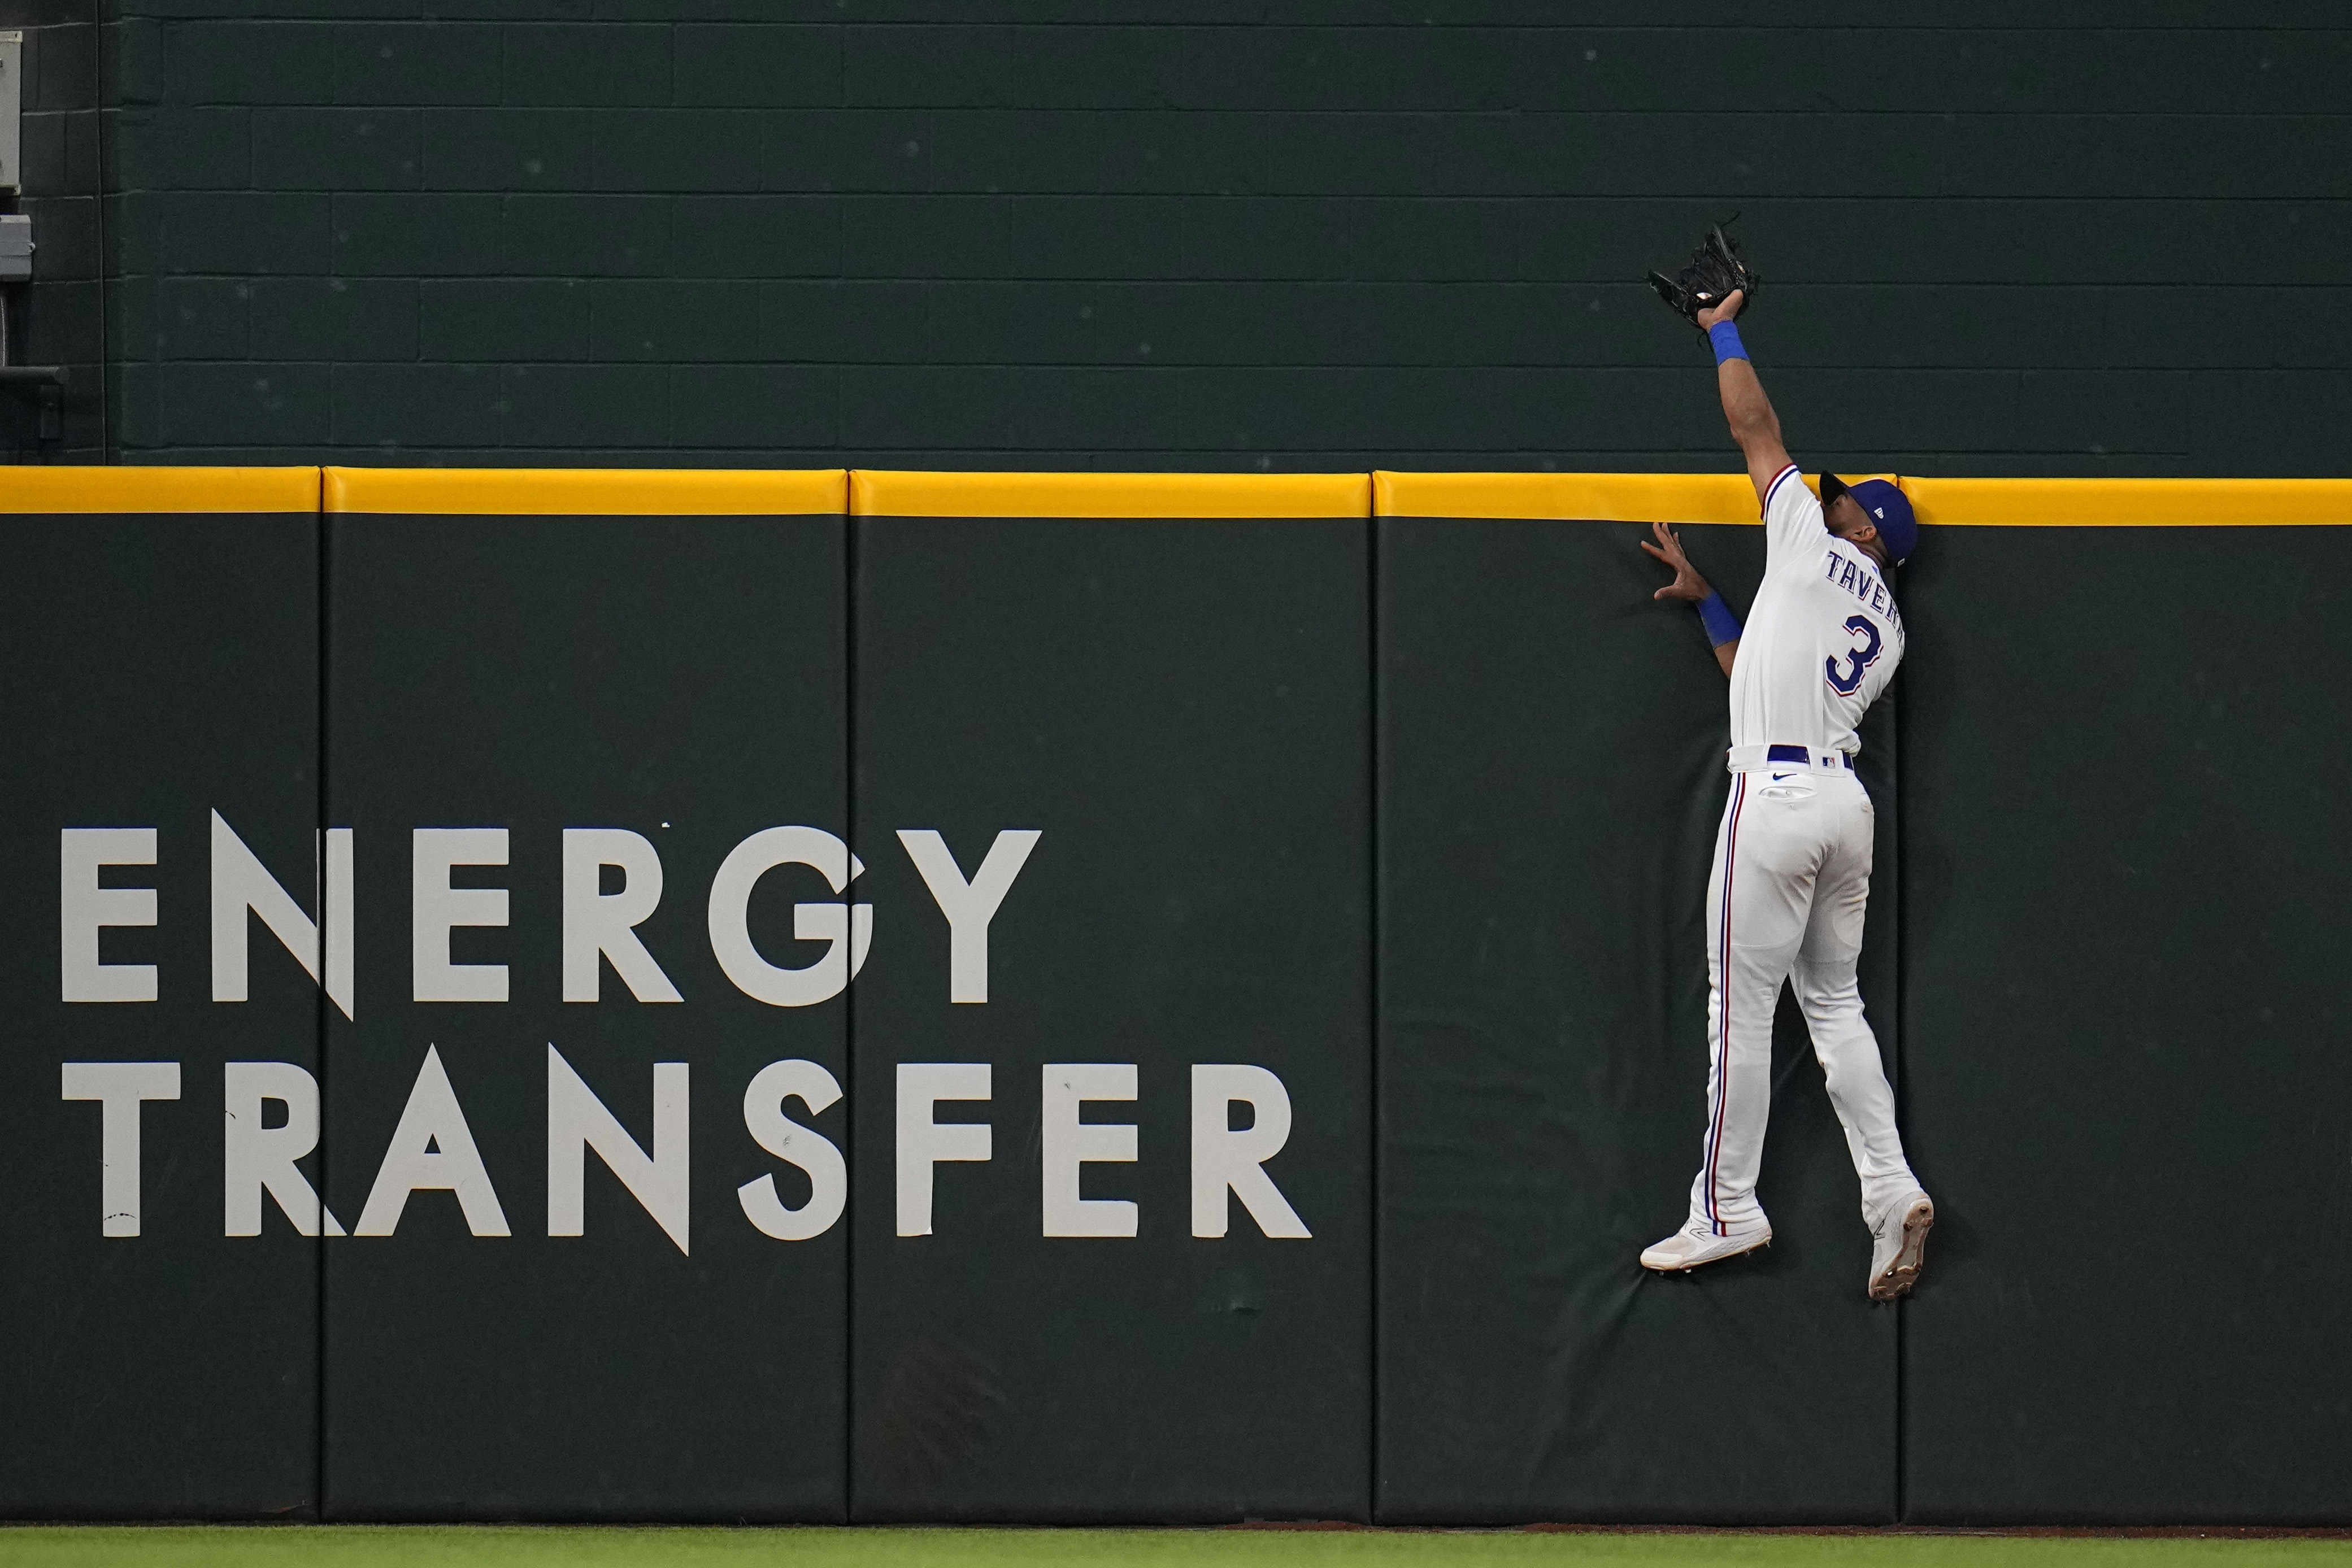 WATCH: Rangers' Leody Taveras brings back home run with spectacular leaping  snag